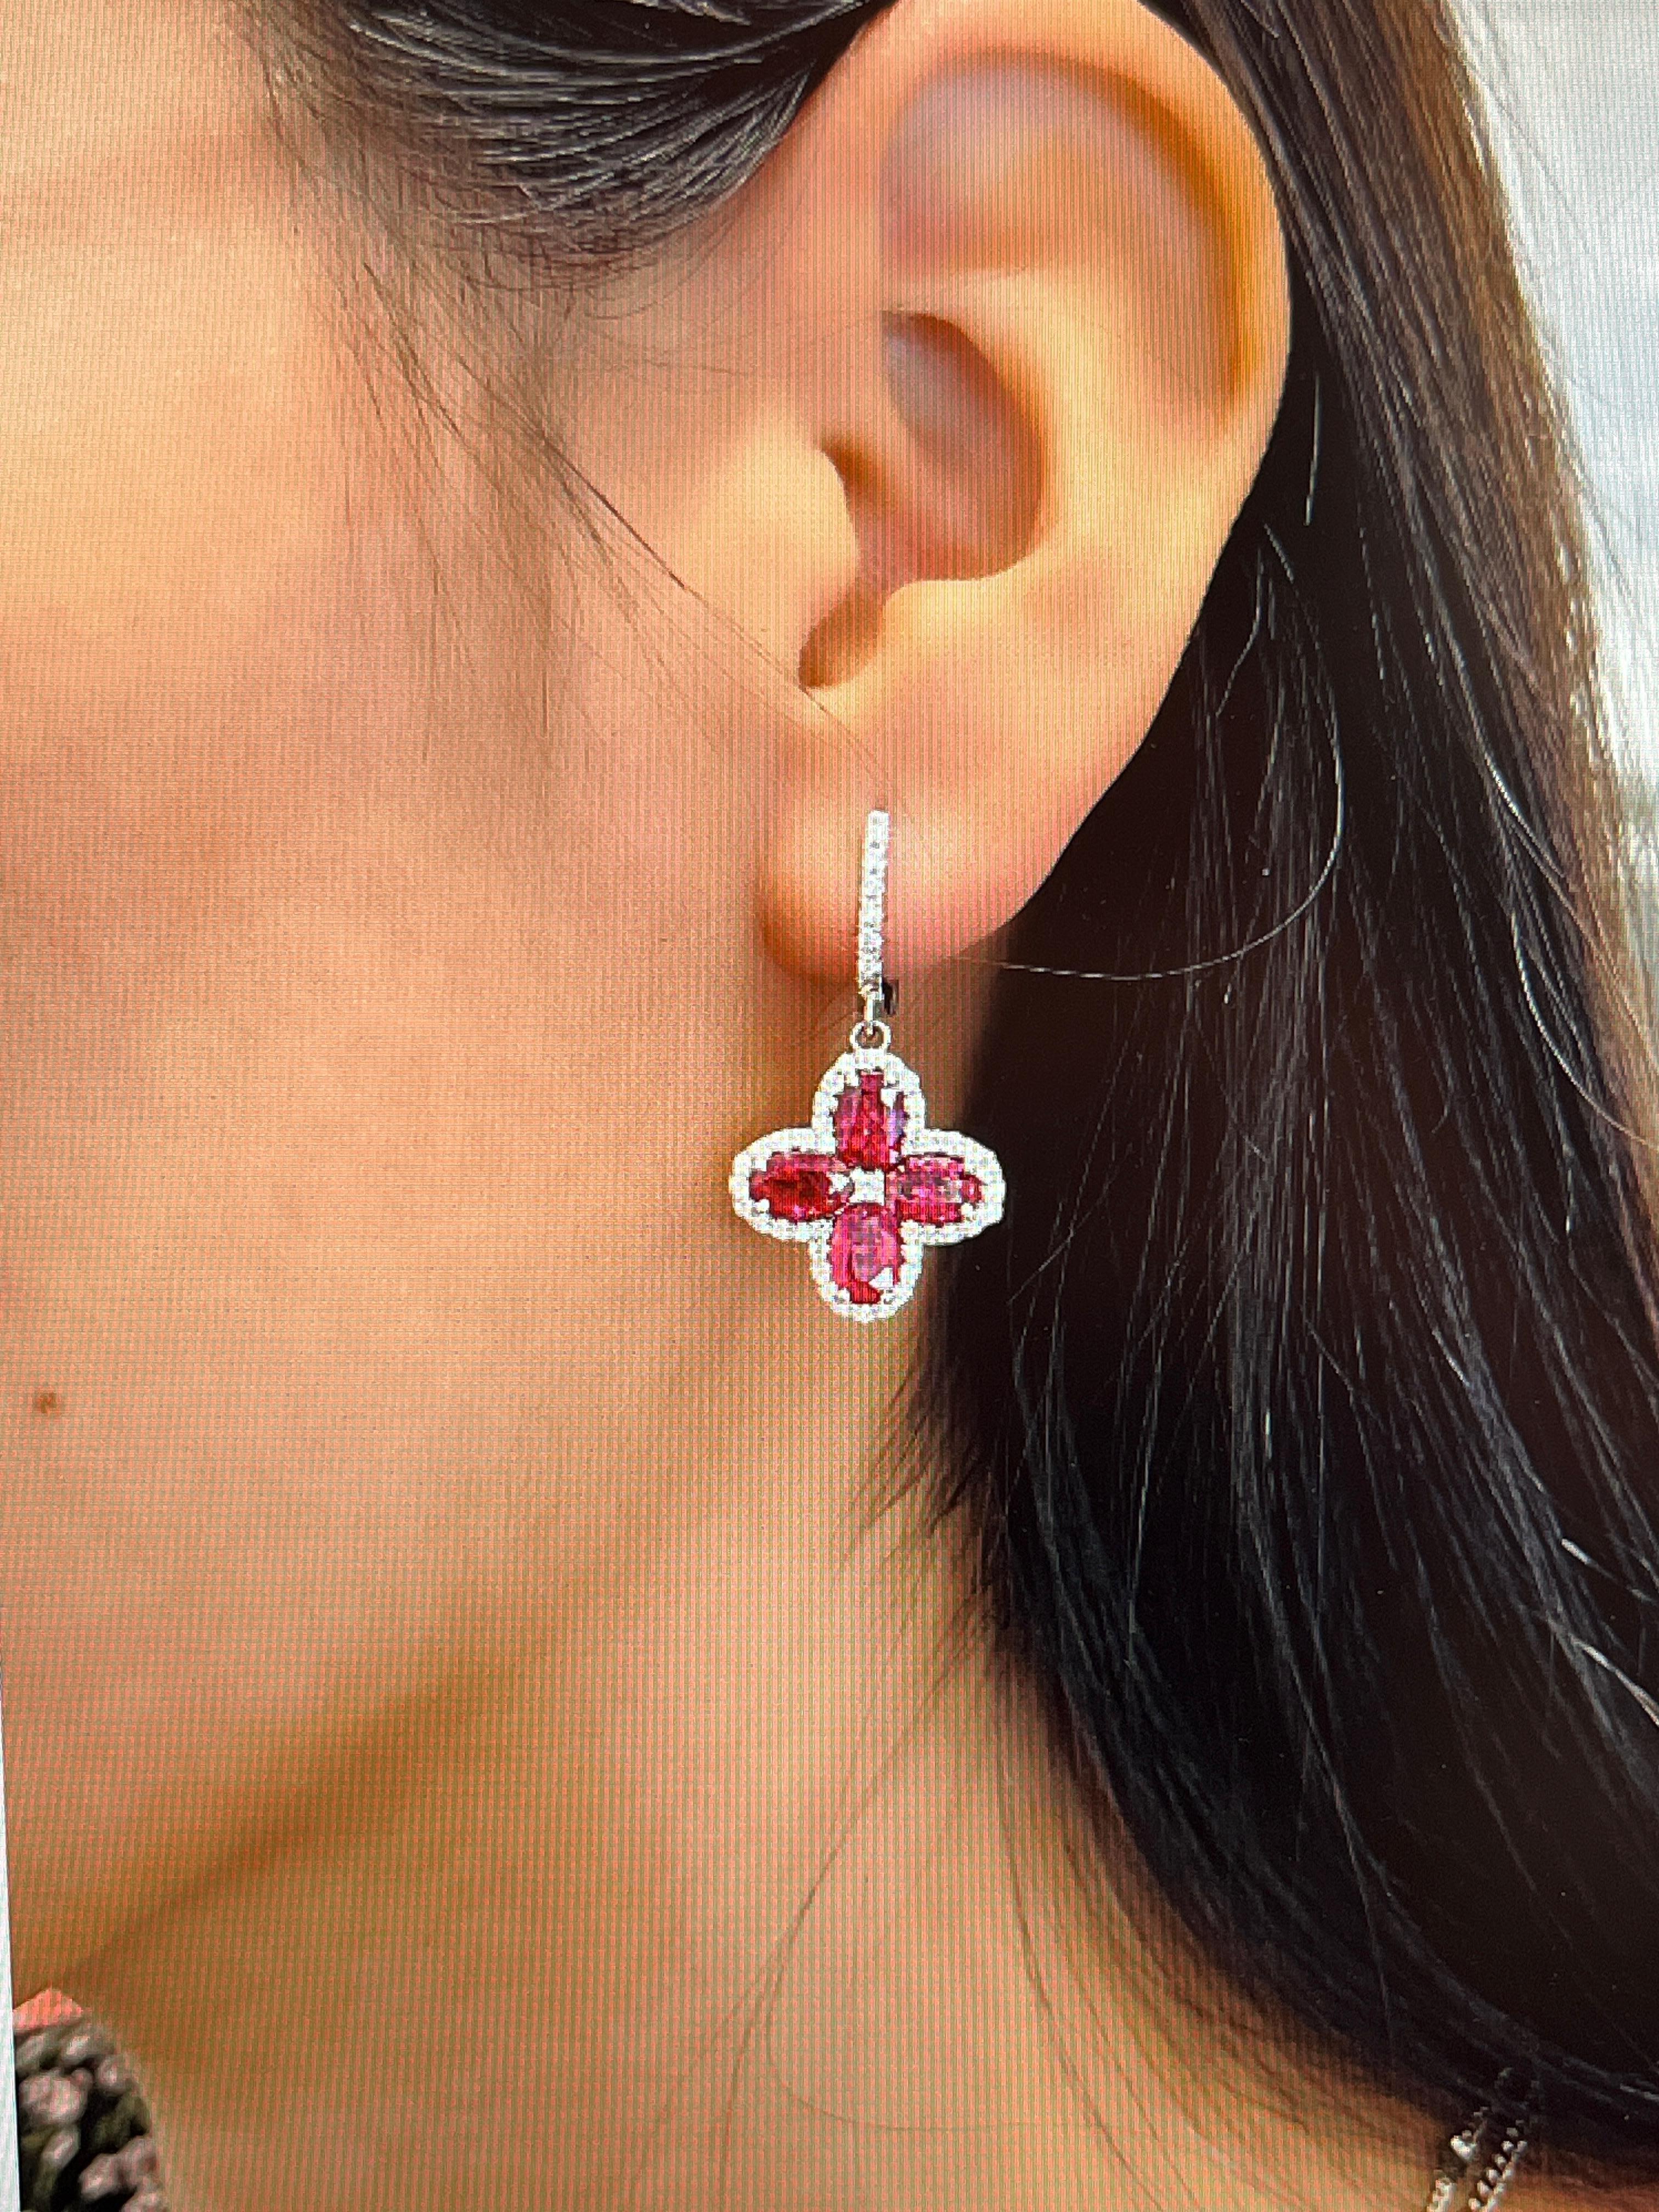 These stunning 6.87 ctw natural Burma ruby and diamond earrings feature 8 oval shape rubies weighing 6.01 ct surrounded by 94 diamonds weighing 0.86 ct set in 18k white gold. The diamonds are E/F in color, and VS1/VS2 in clarity. A great addition to